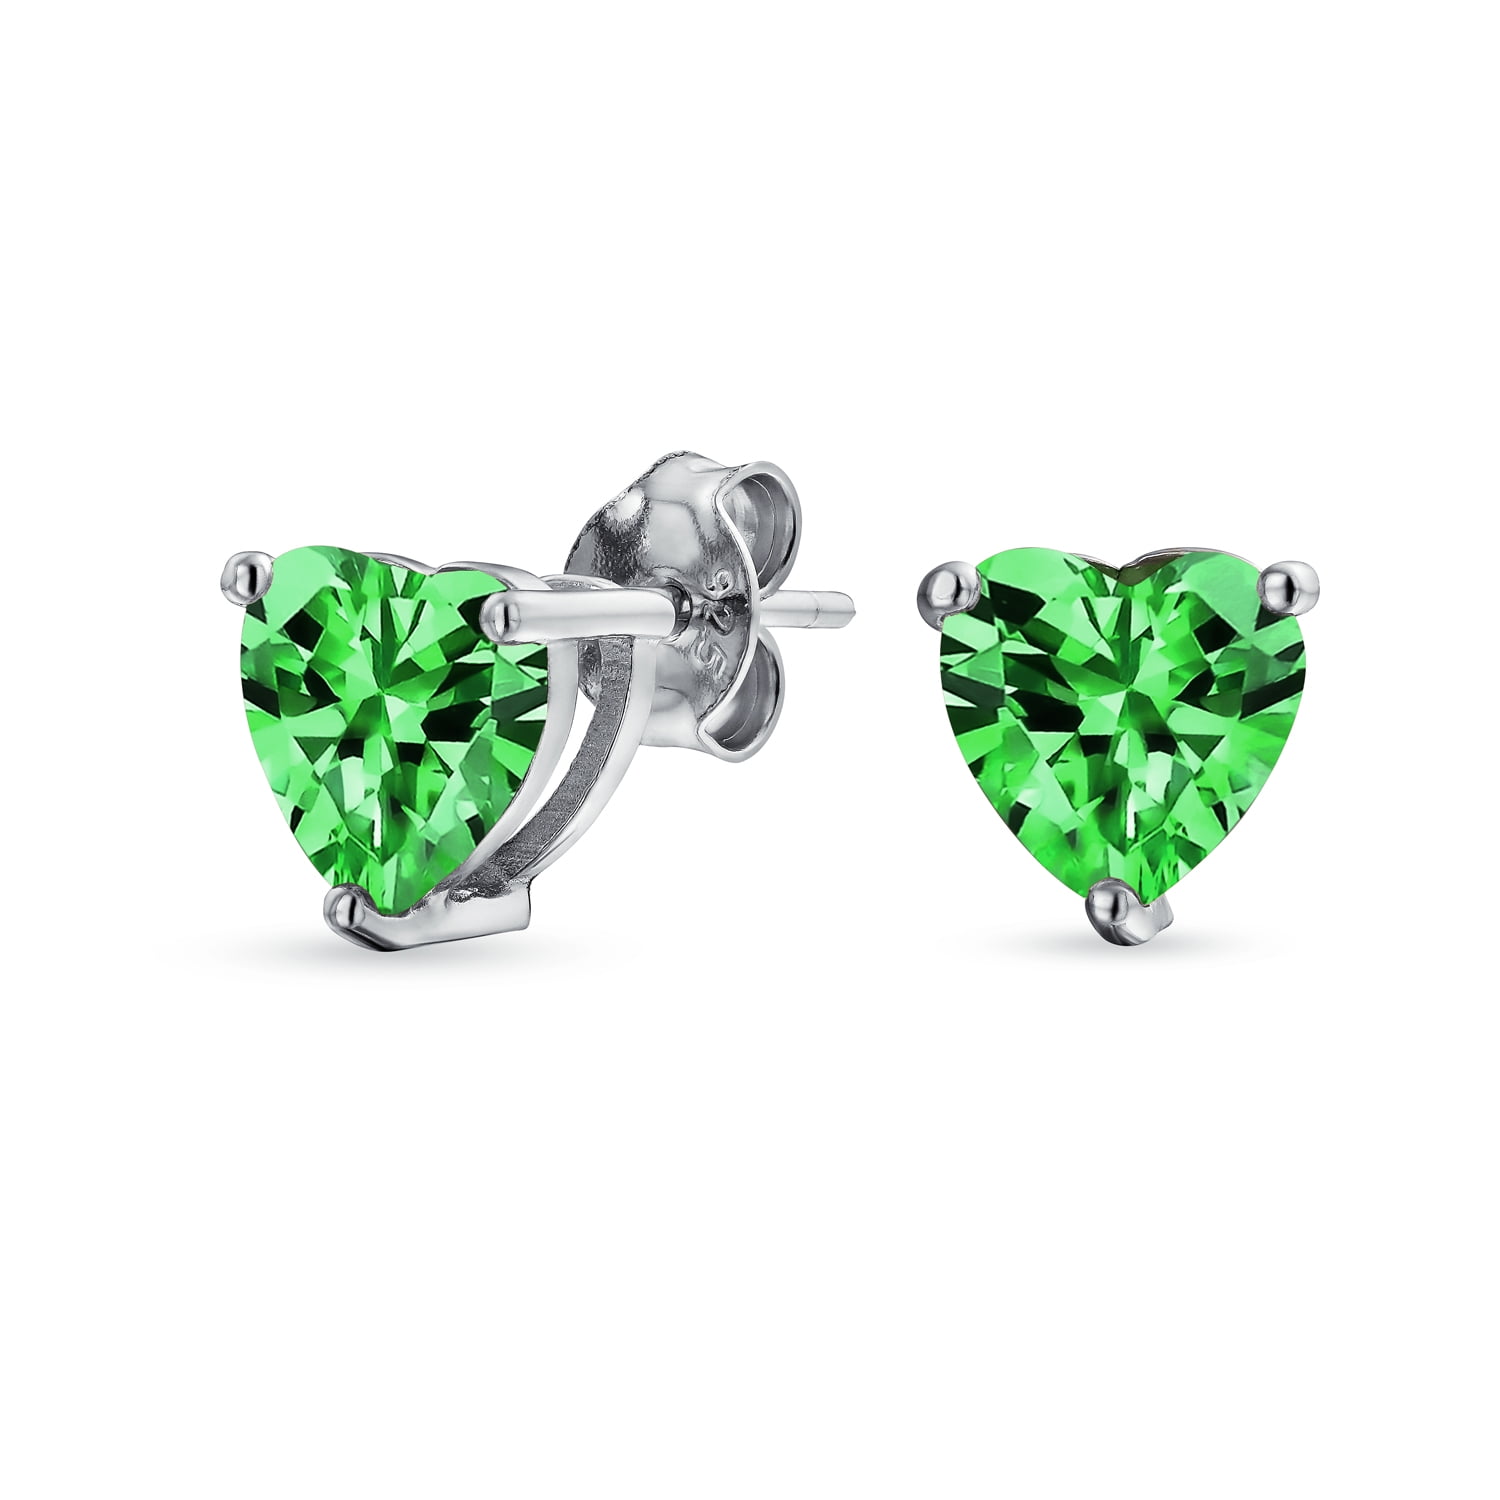 Details about   5 Ct Green Heart Emerald Stud Earring Women Jewelry 14K Gold Plated Nickel Free 